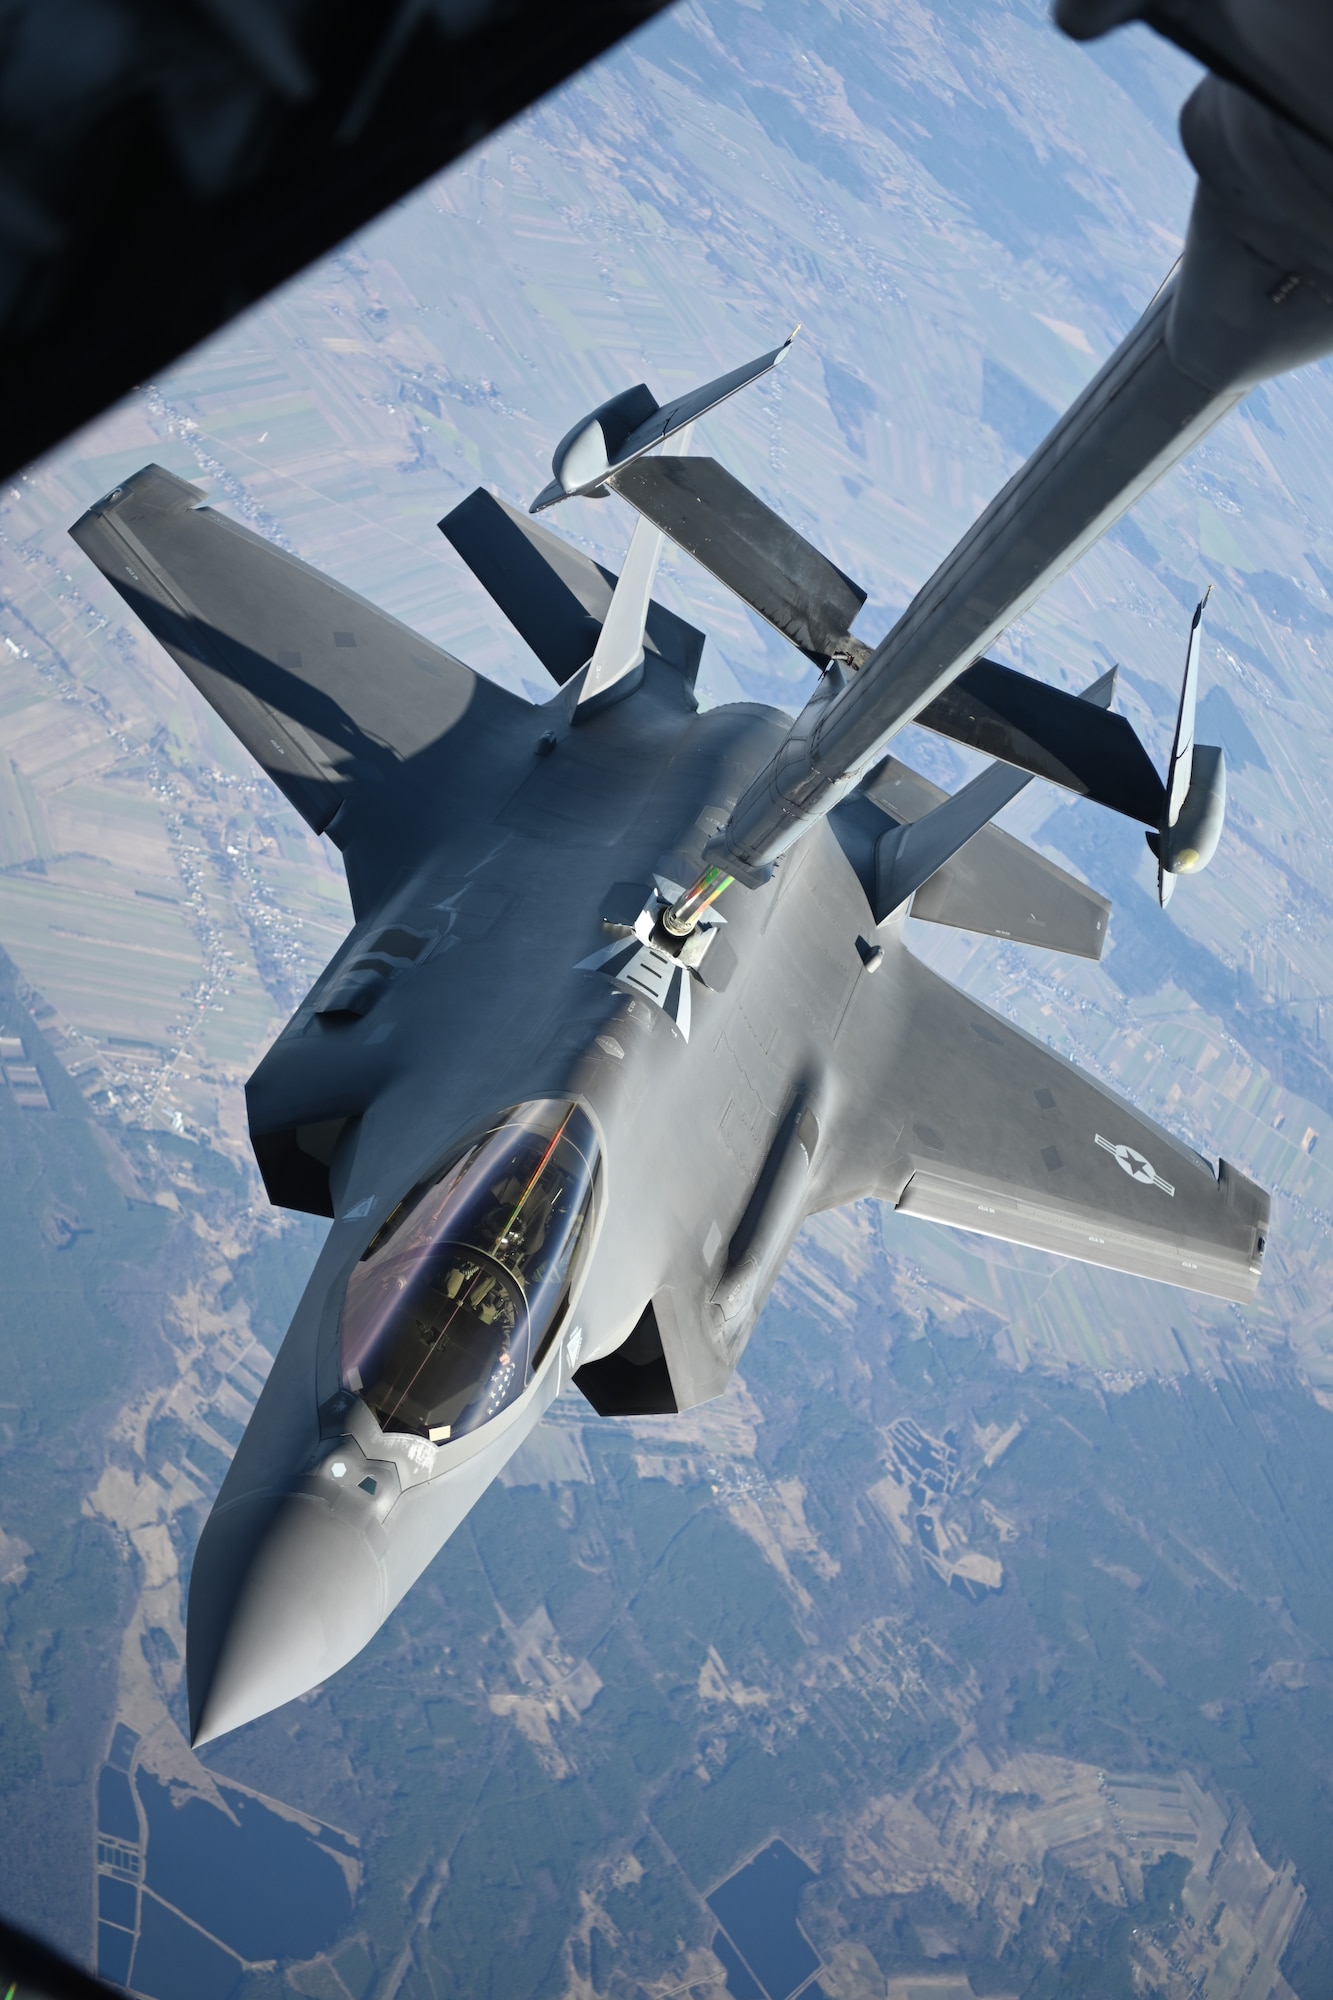 A U.S. Air Force F-35 Lightning II aircraft assigned to the 34th Fighter Squadron receives fuel from a KC-10 Extender aircraft over Poland, Feb. 24, 2022. The F-35 aircraft affords NATO leaders the flexibility to project power and assert air dominance in highly contested environments. (U.S. Air Force photo by Senior Airman Joseph Barron)